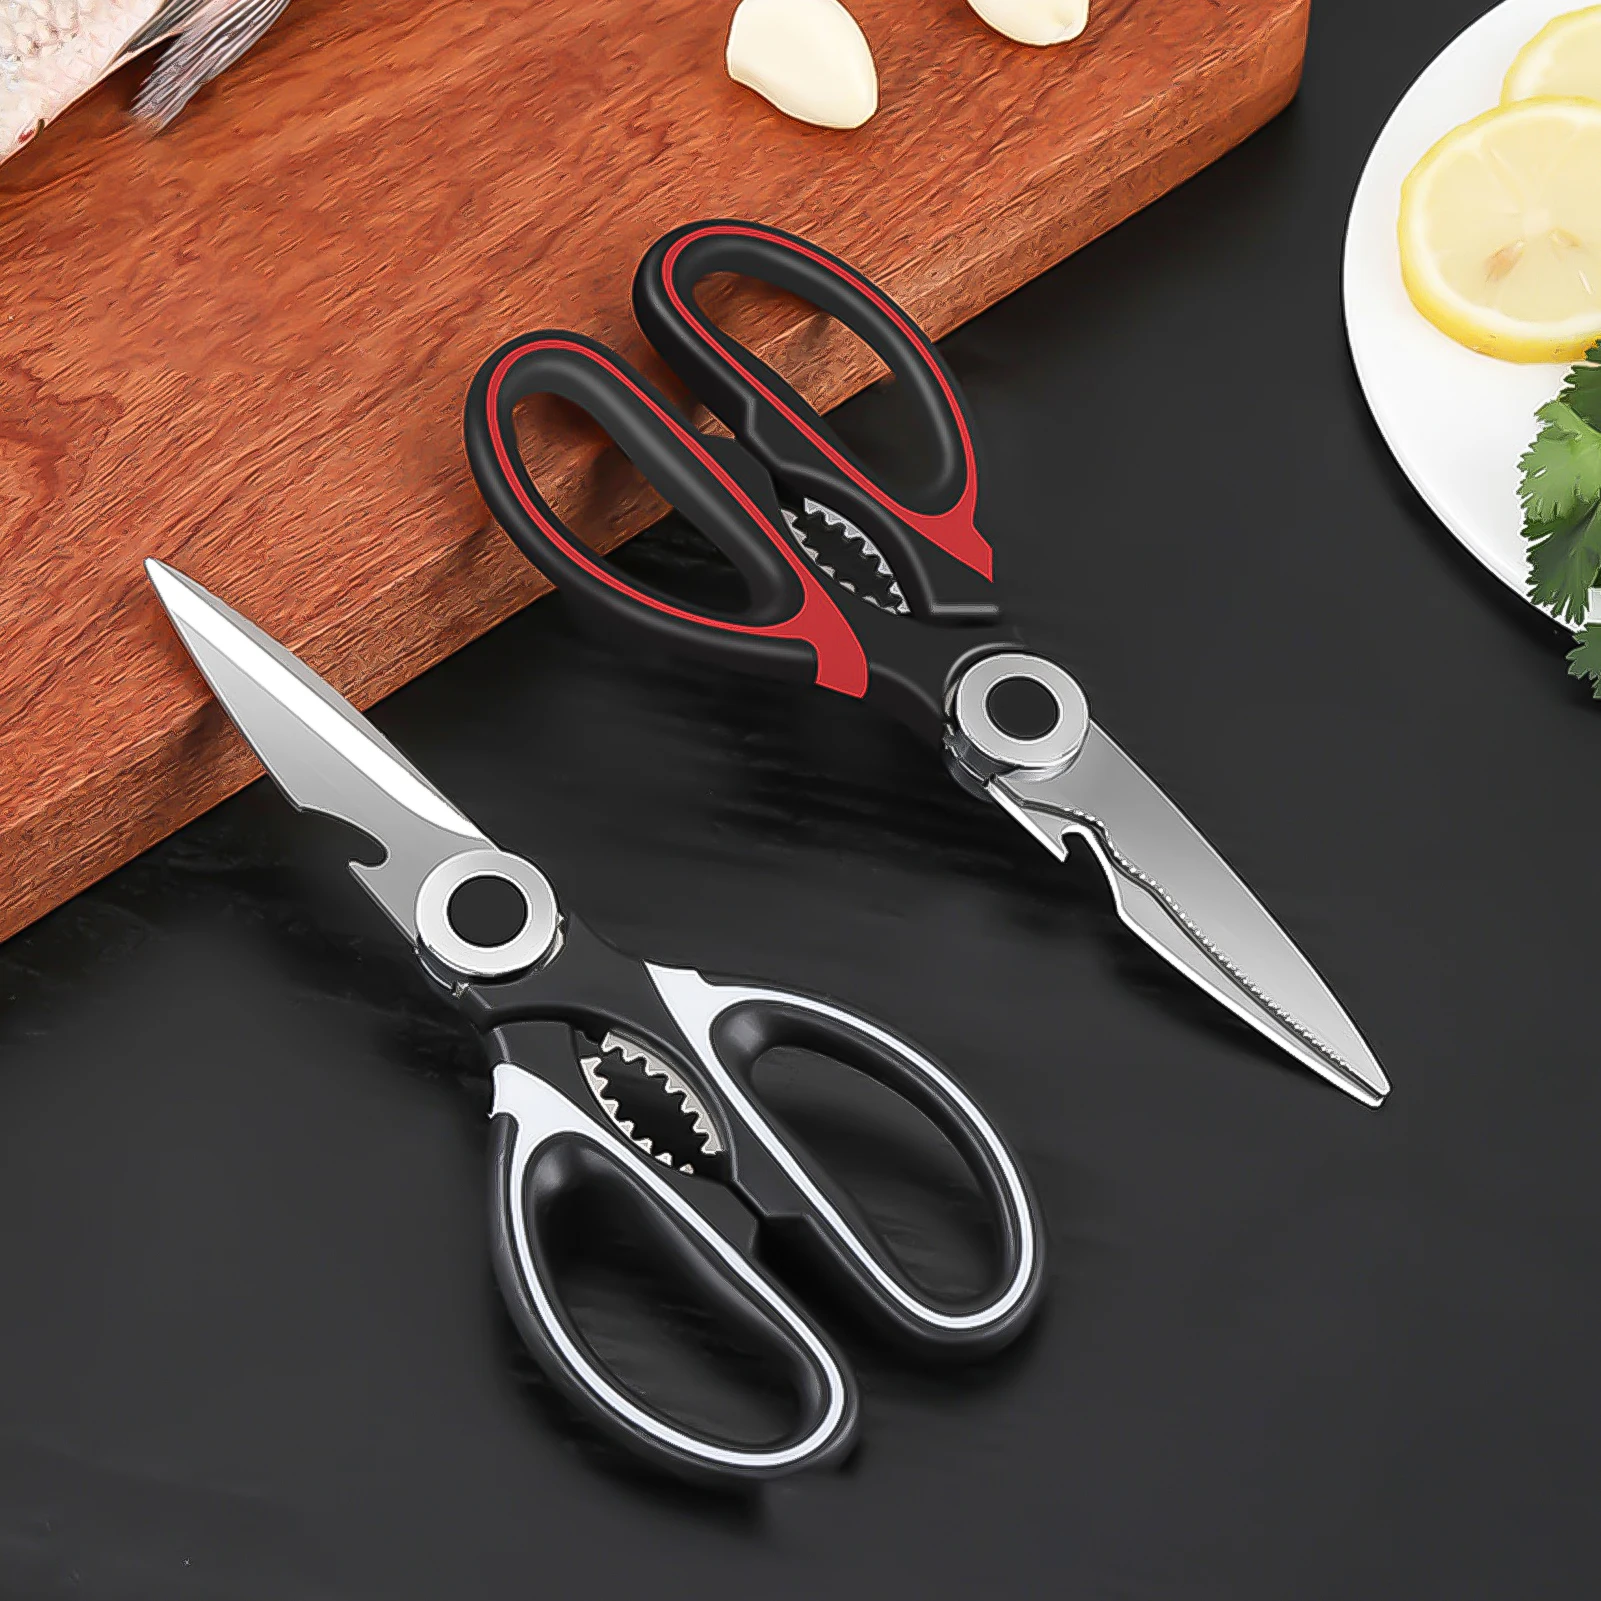 

Kitchen Chicken Scissors Multifunctional Stainless Steel Poultry Fish Tool Shears For Meat Barbecue Cutting Supplies Bone Opener